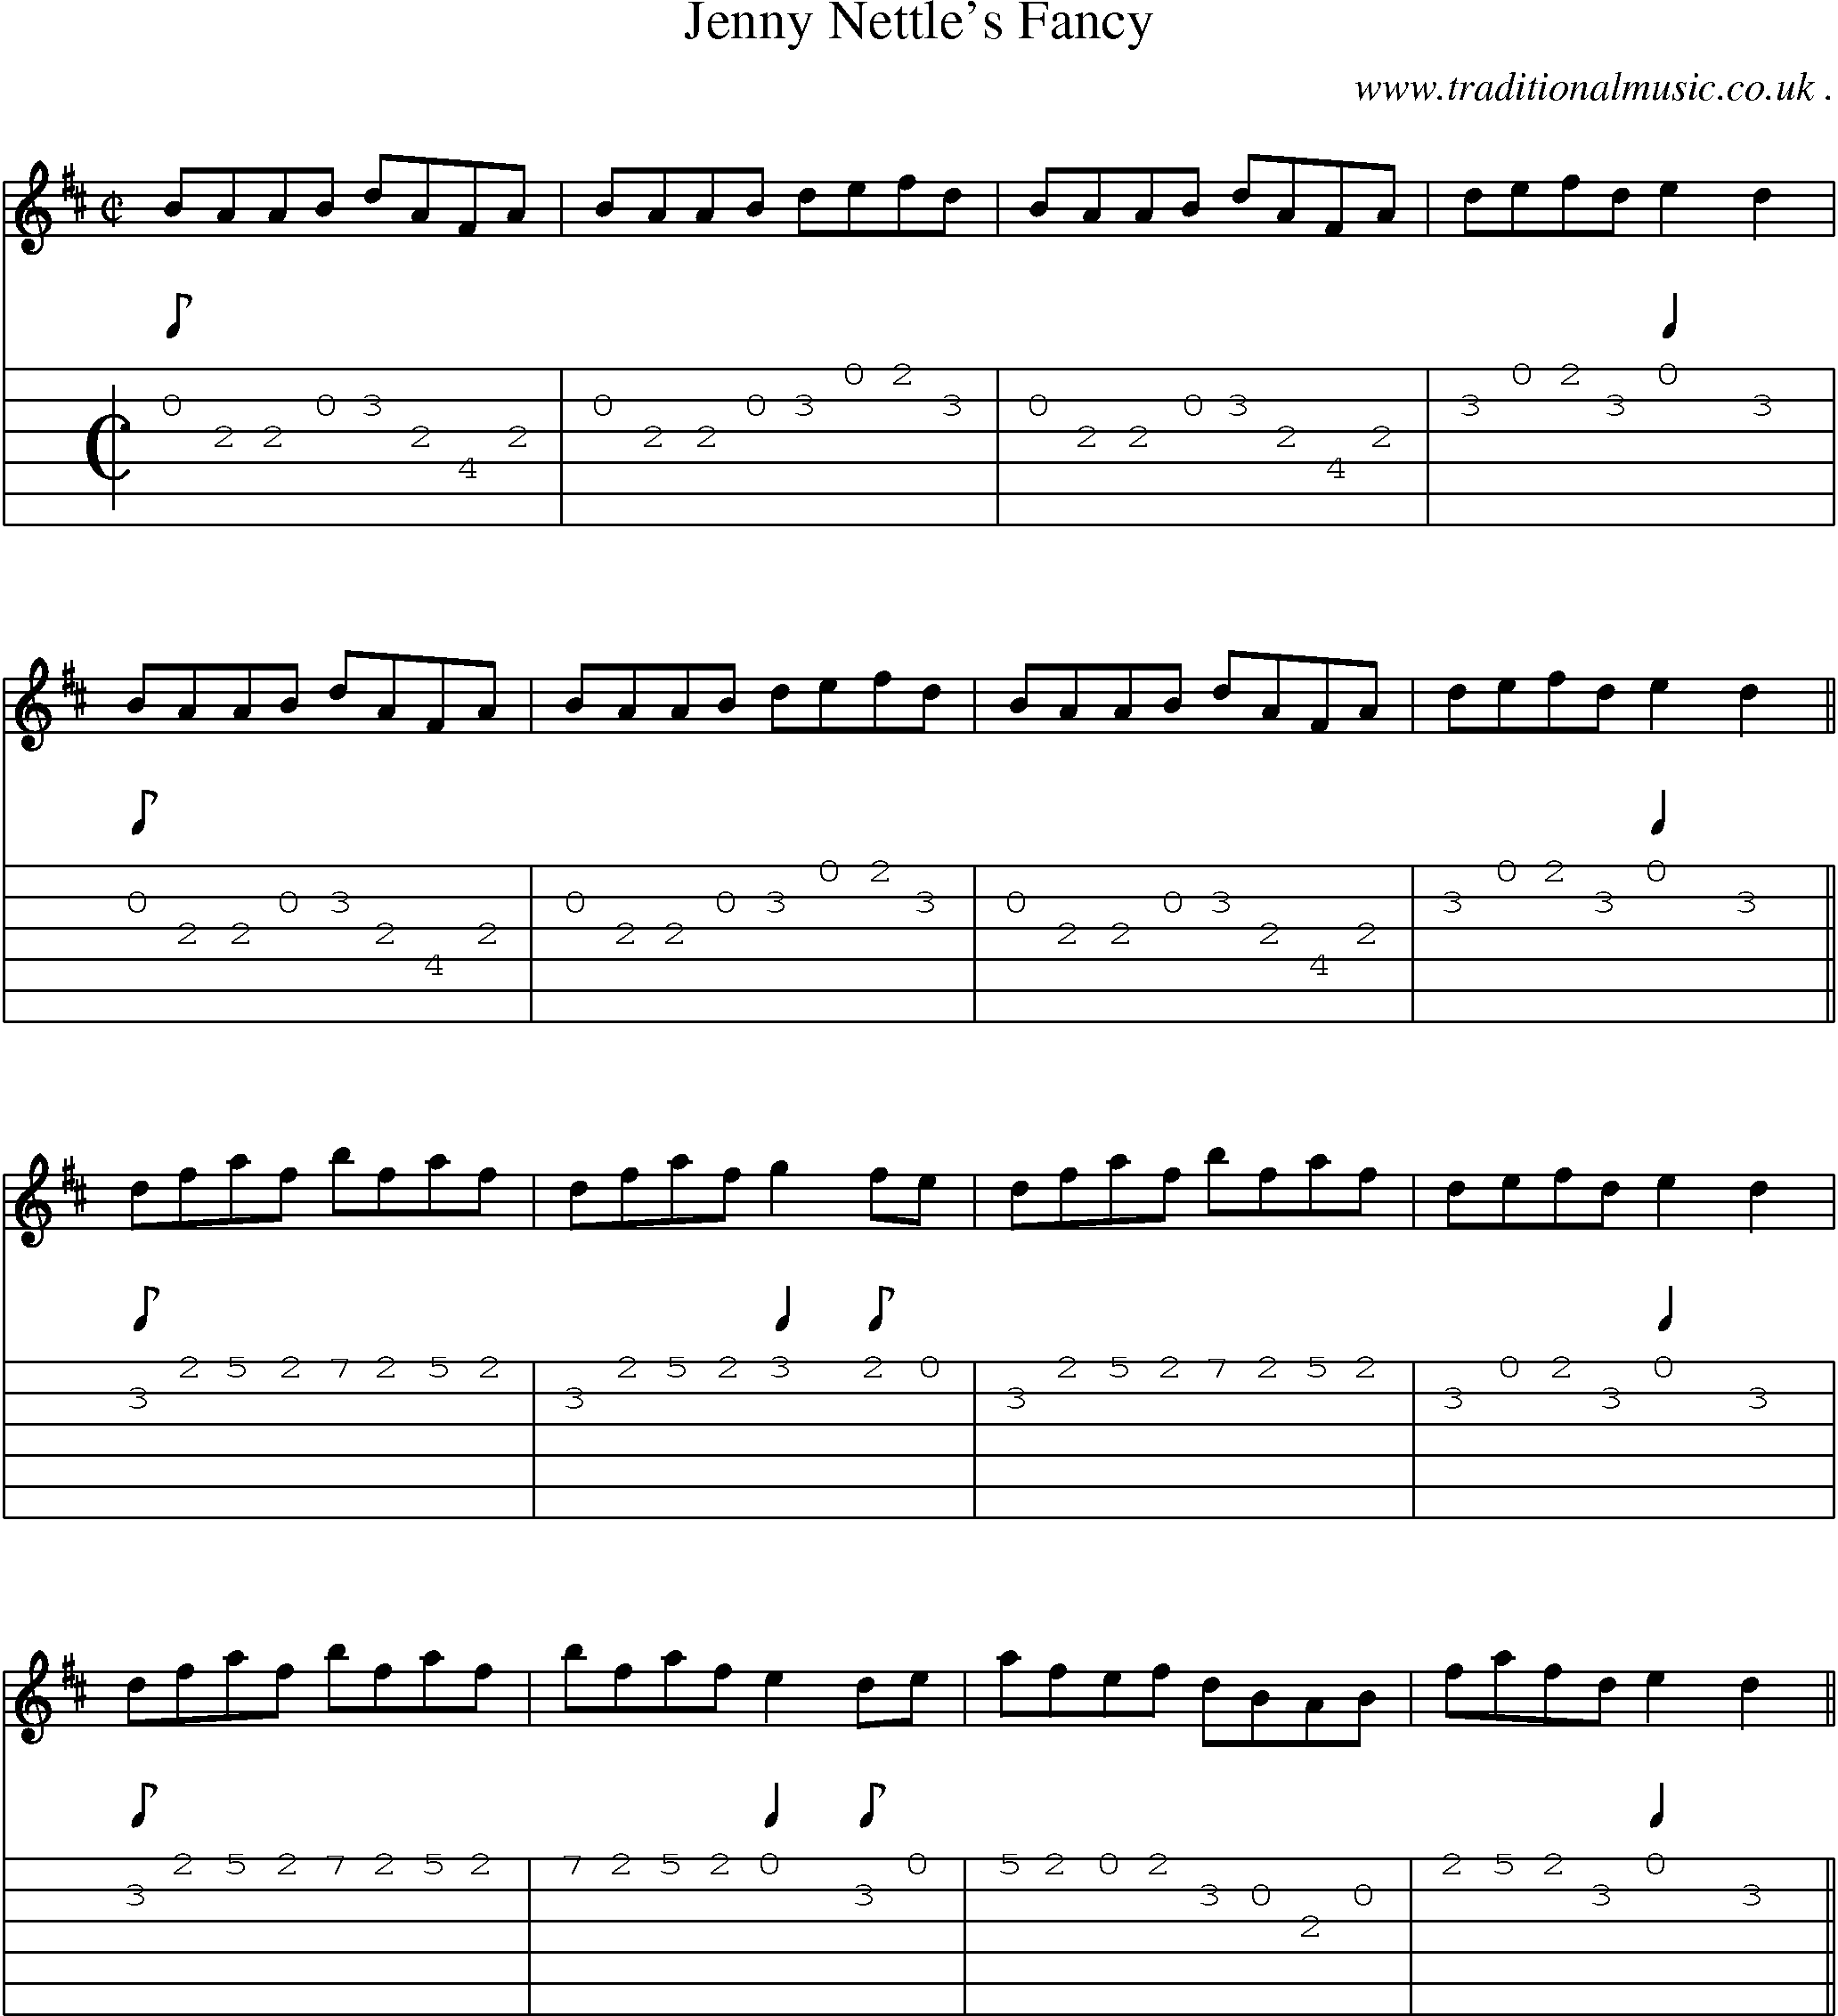 Sheet-Music and Guitar Tabs for Jenny Nettles Fancy